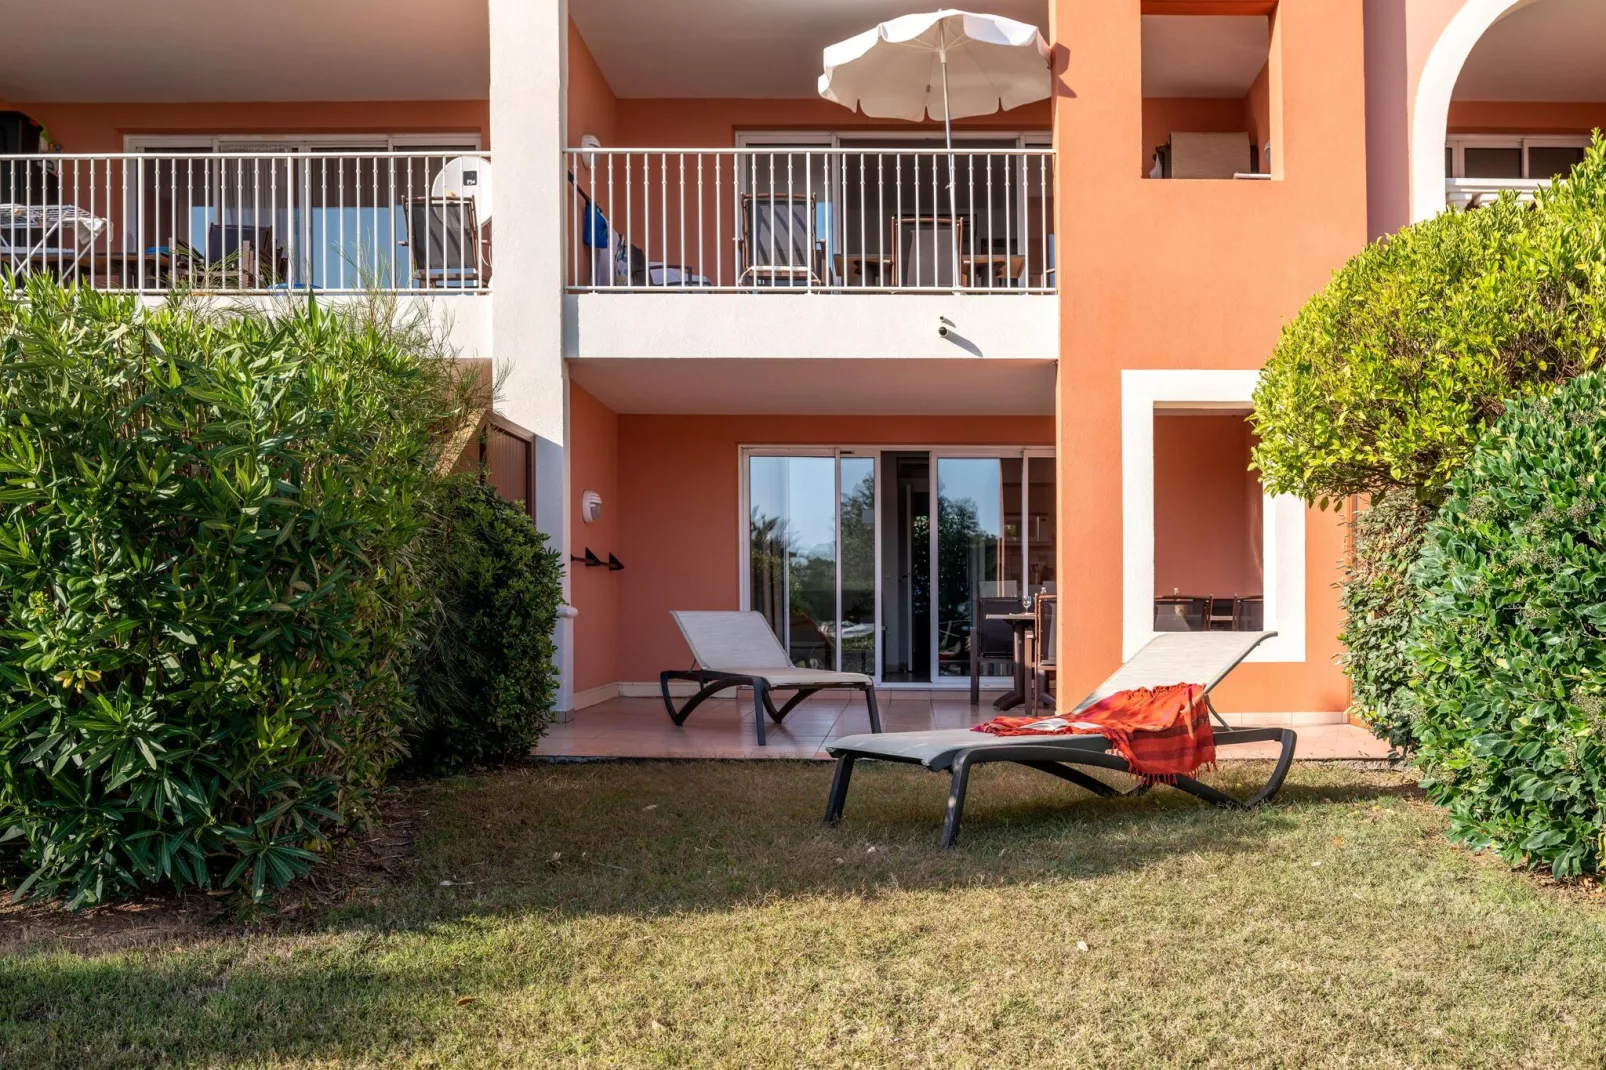 Residence Les Calanques, Les Issambres-27 Standard - Apt. 6 p. - 1 bedroom+1 sleeping alcove - terrace-Buitenkant zomer